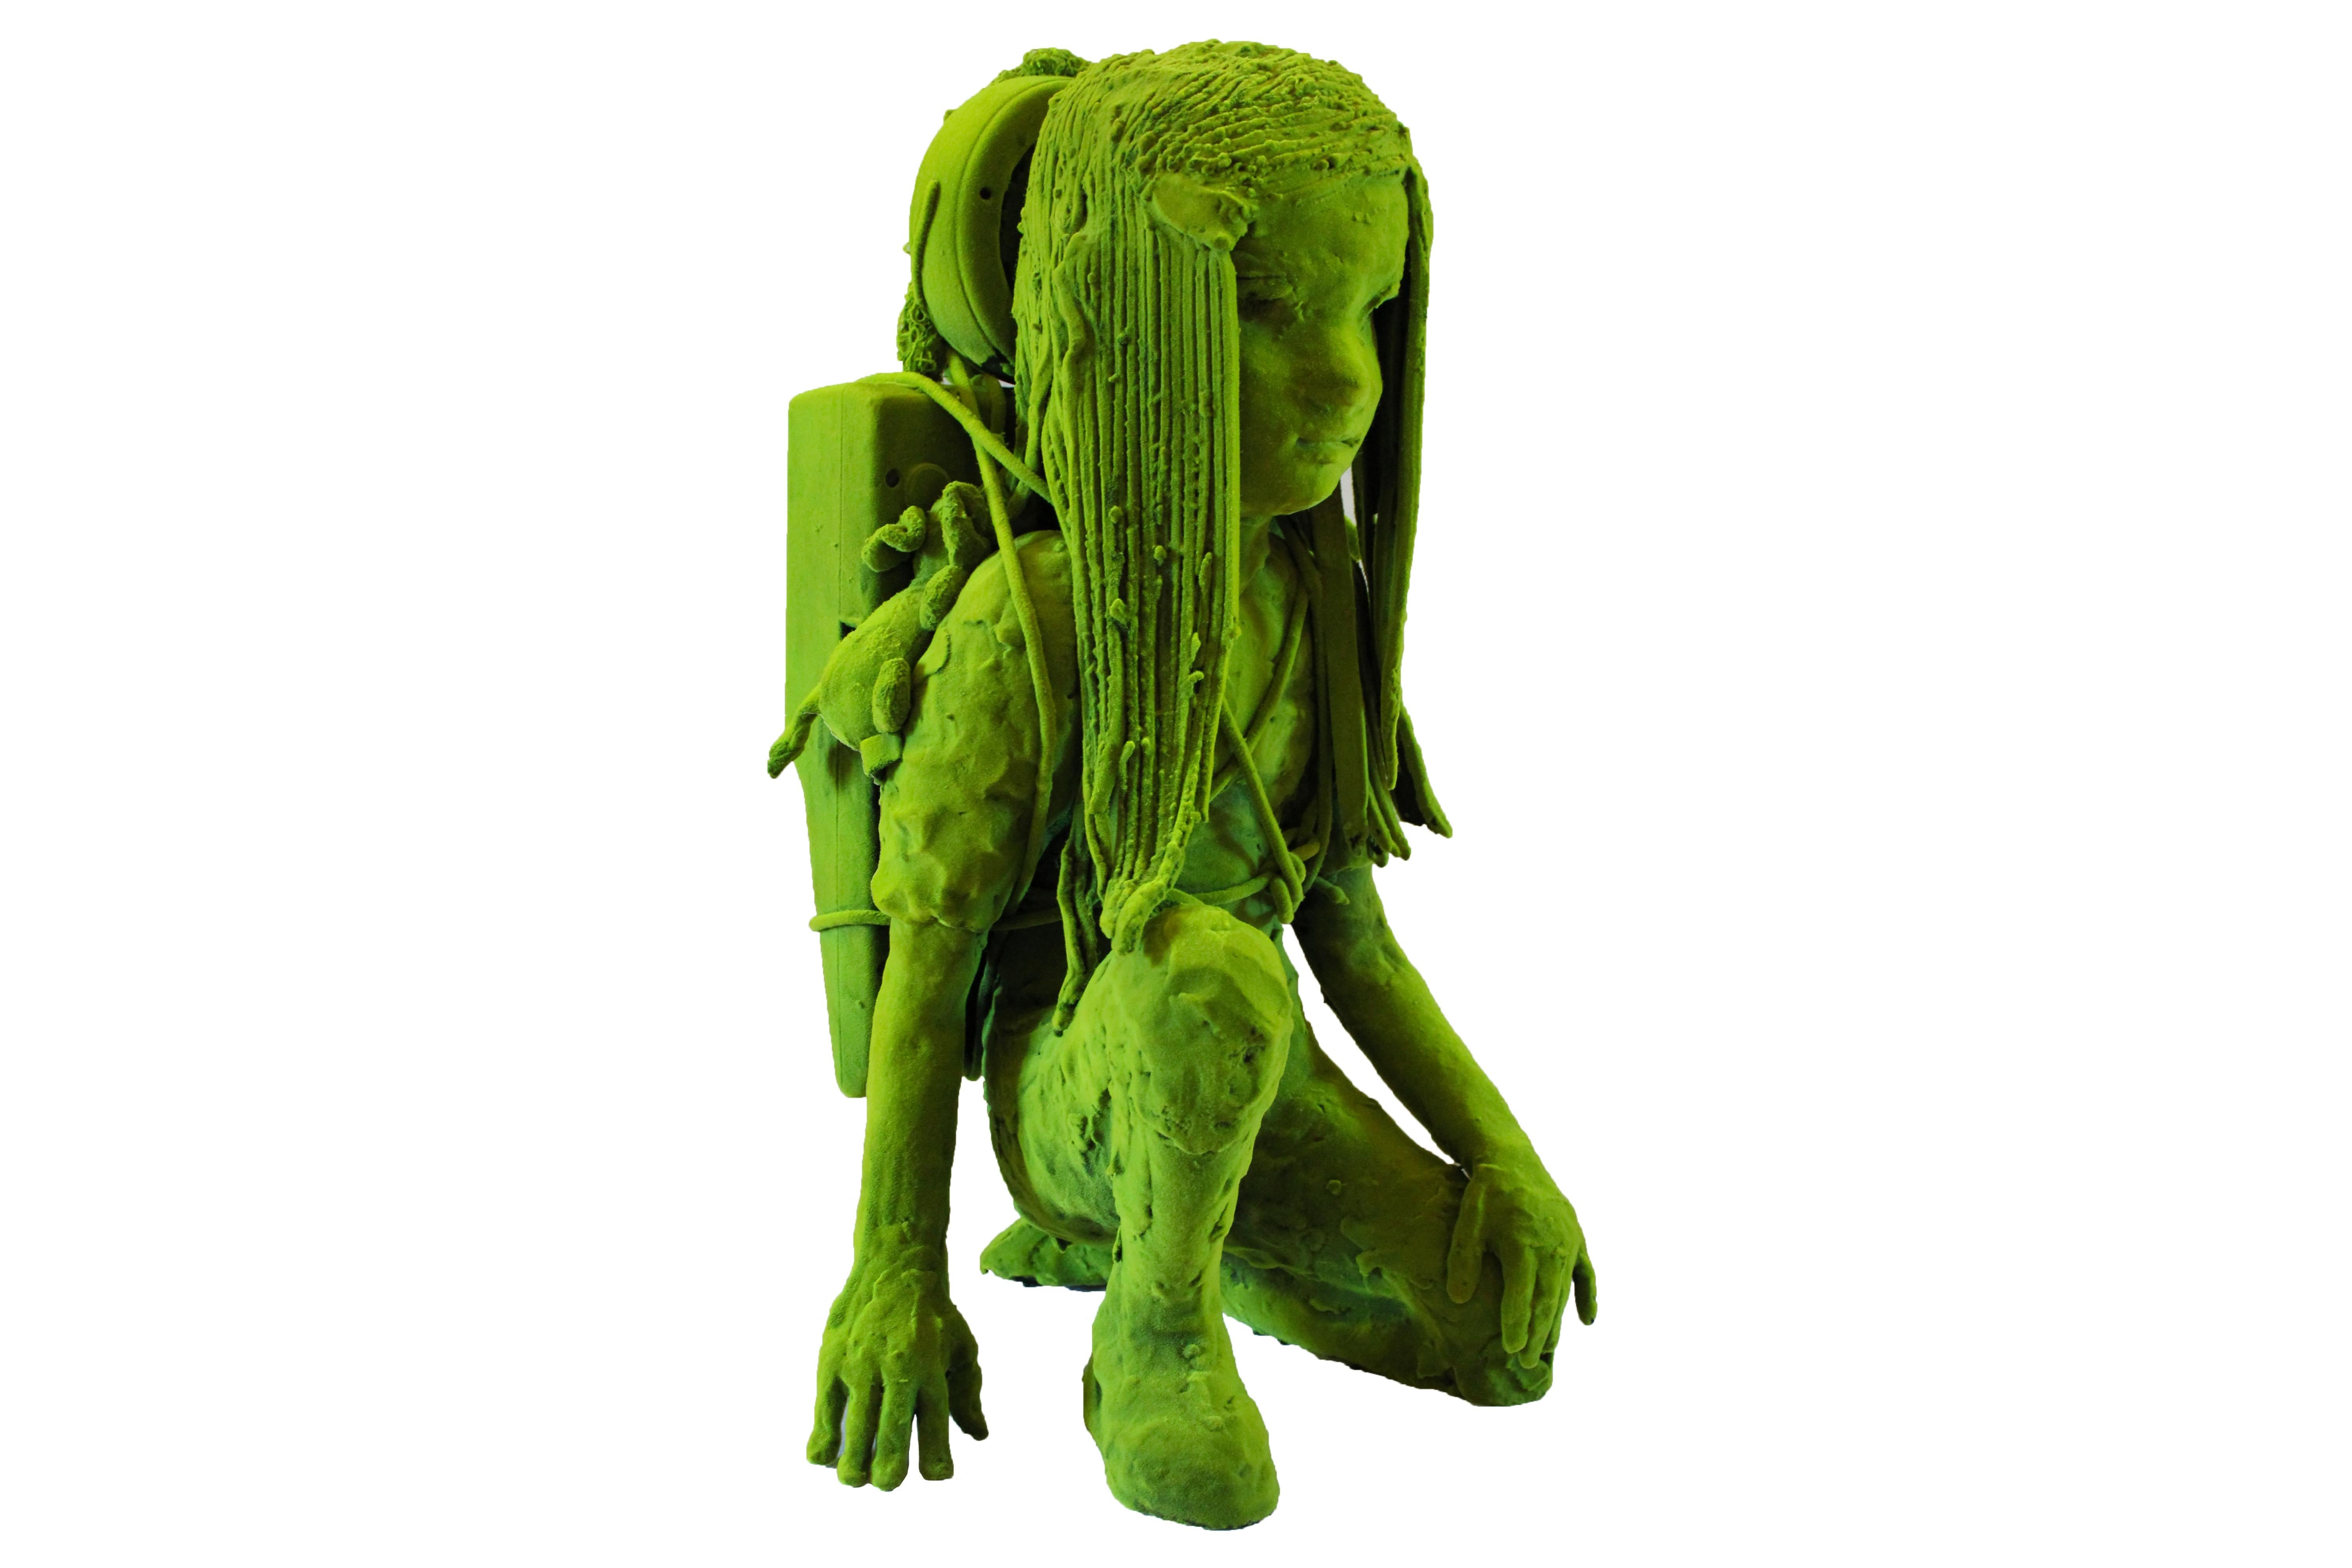 Moss girl sculpture by Kim Simonson.
Synthetic moss sculpture over a porcelain base.
From the series of 